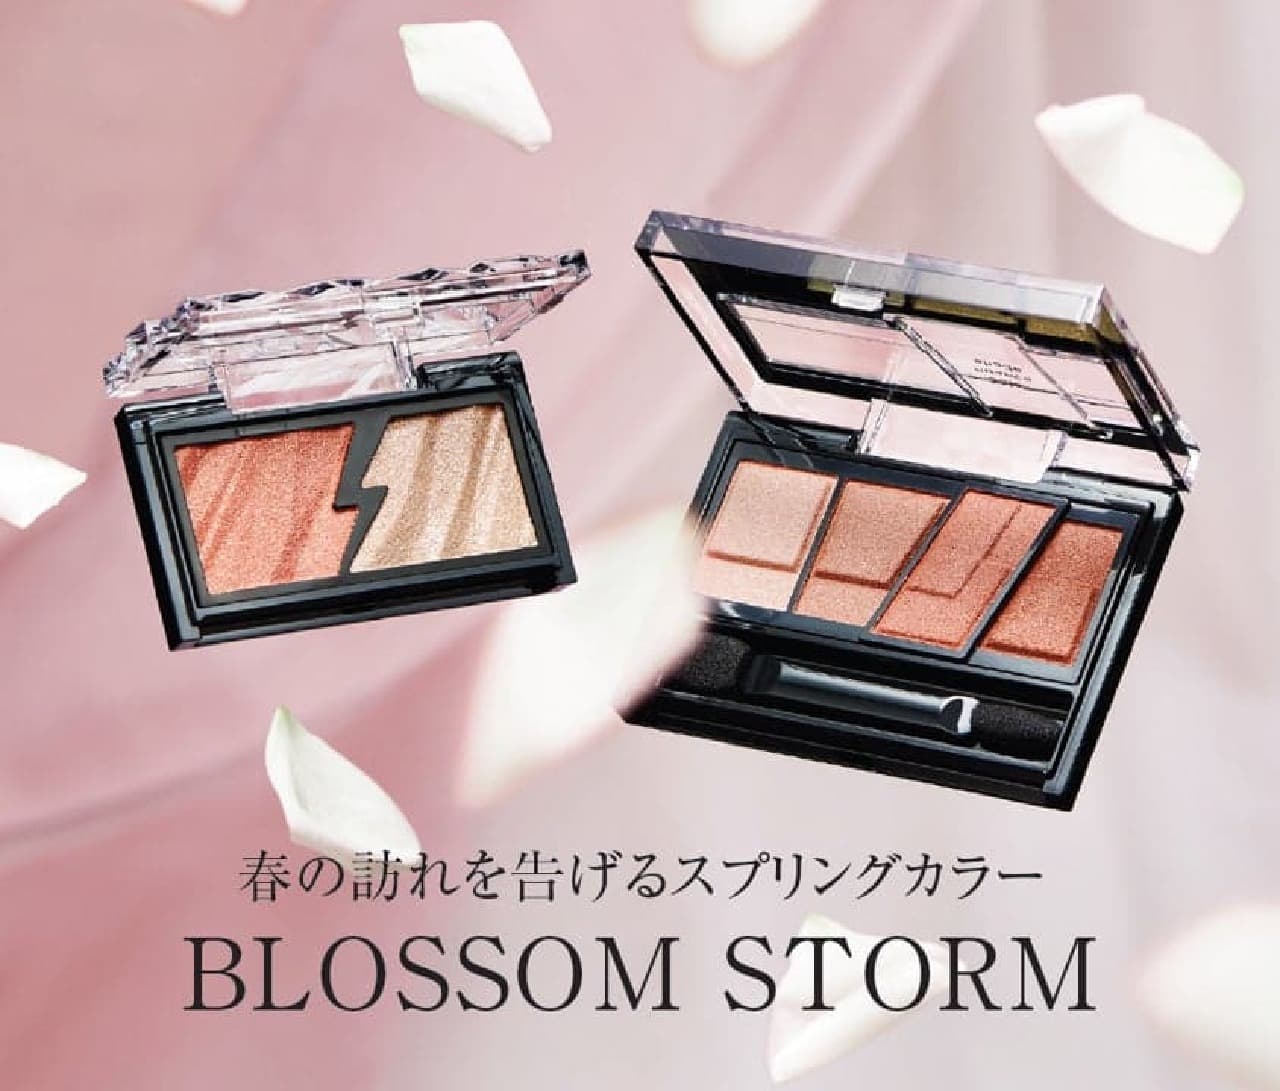 Kanebo Cosmetics' KATE releases new limited edition spring eyeshadow "BLOSSOM STORM"! “Designing Brown Eyes” and “Electric Shock Eyes” will be available in limited quantities on February 24th Image 1